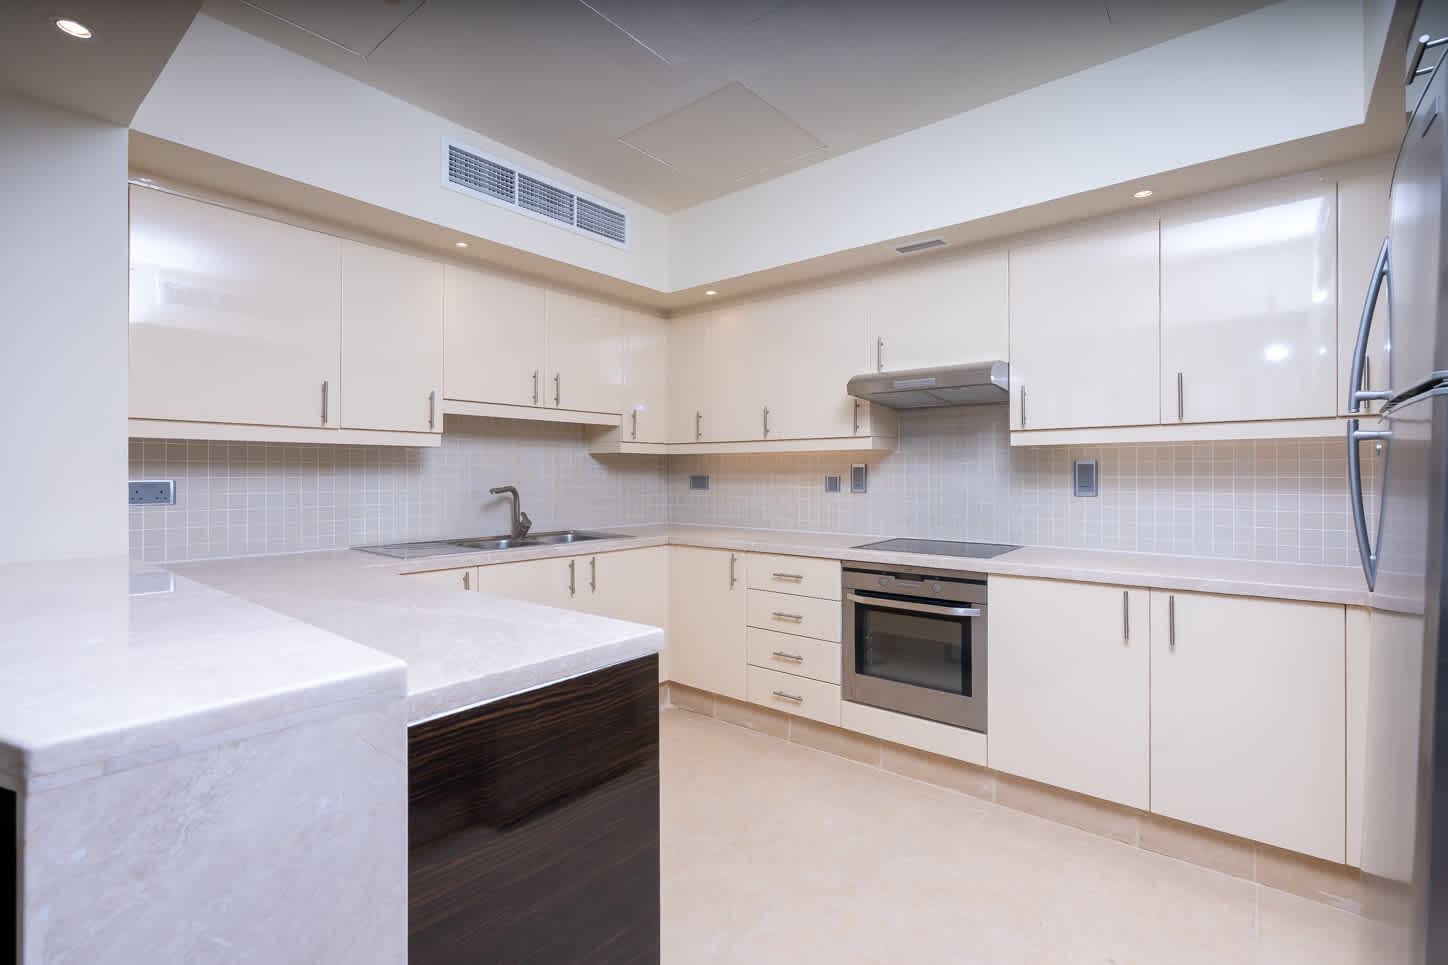 25 Spaces Real Estate - Qanat Quartier - Properties for Rent - 15th of MAY 2022 (ref THS2525)5